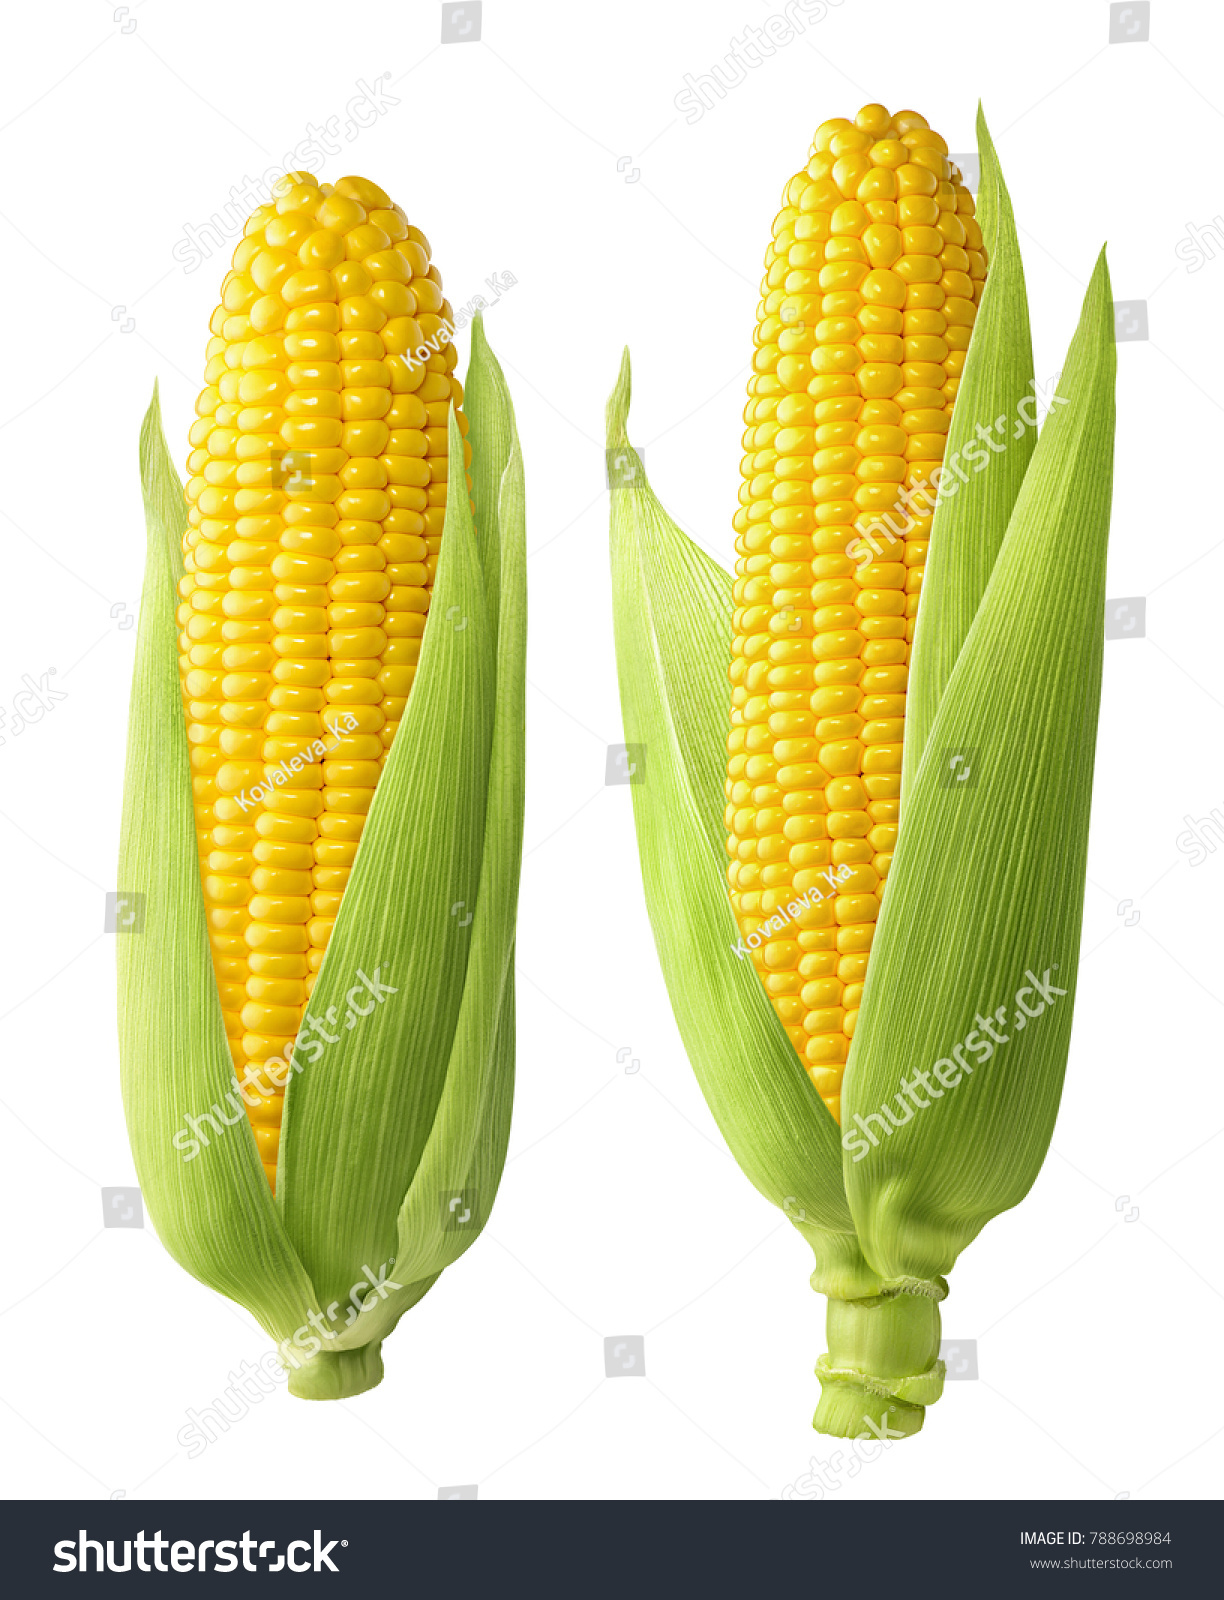 Fresh corn ears with leaves set isolated on white background as package design element #788698984